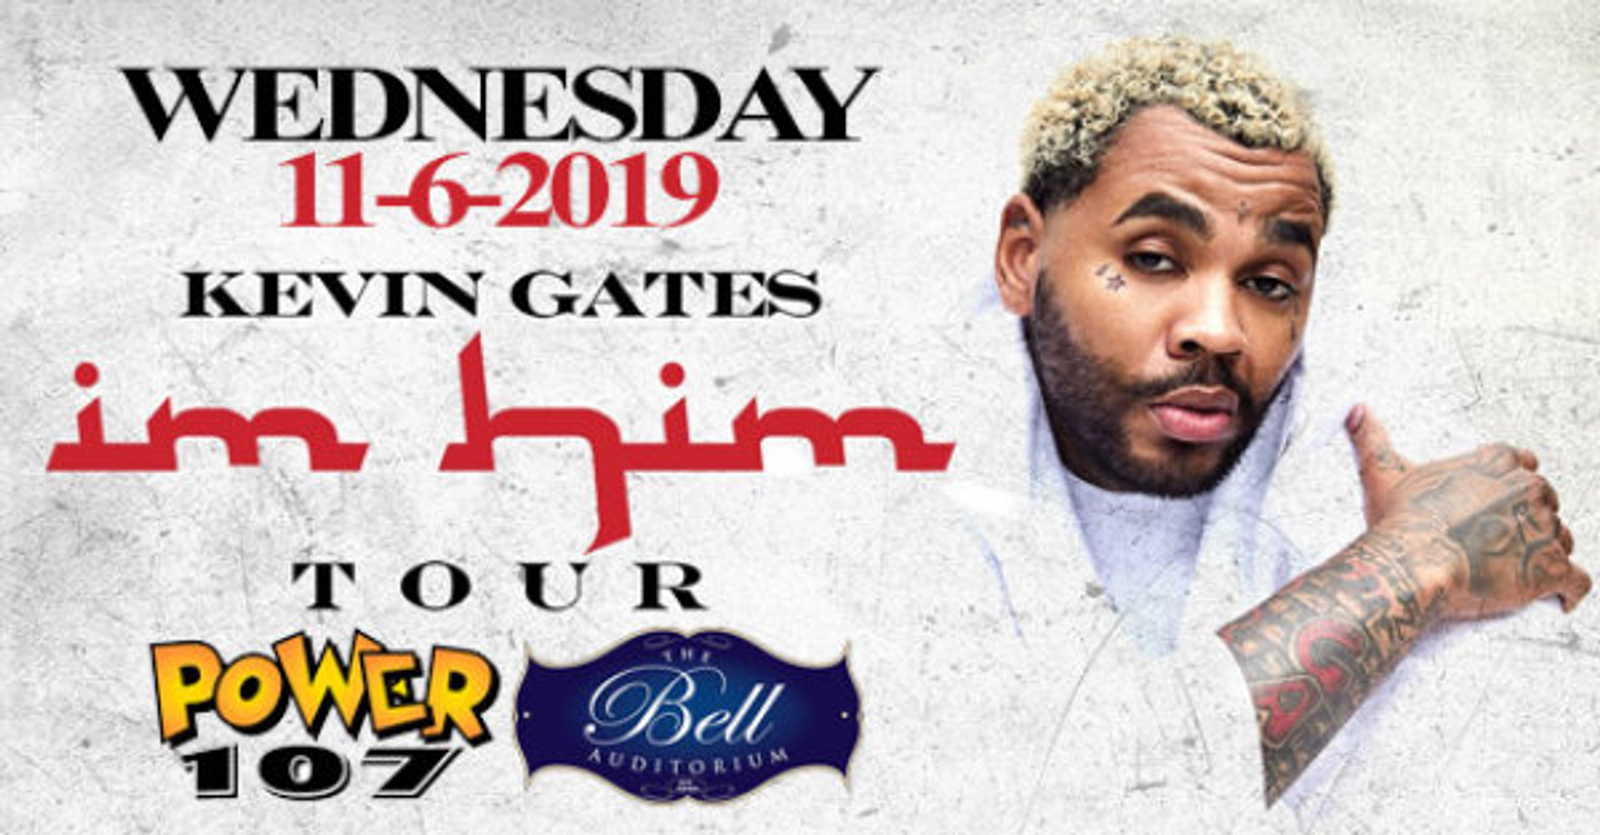 See Kevin Gates at the Bell on 11/6! - Thumbnail Image